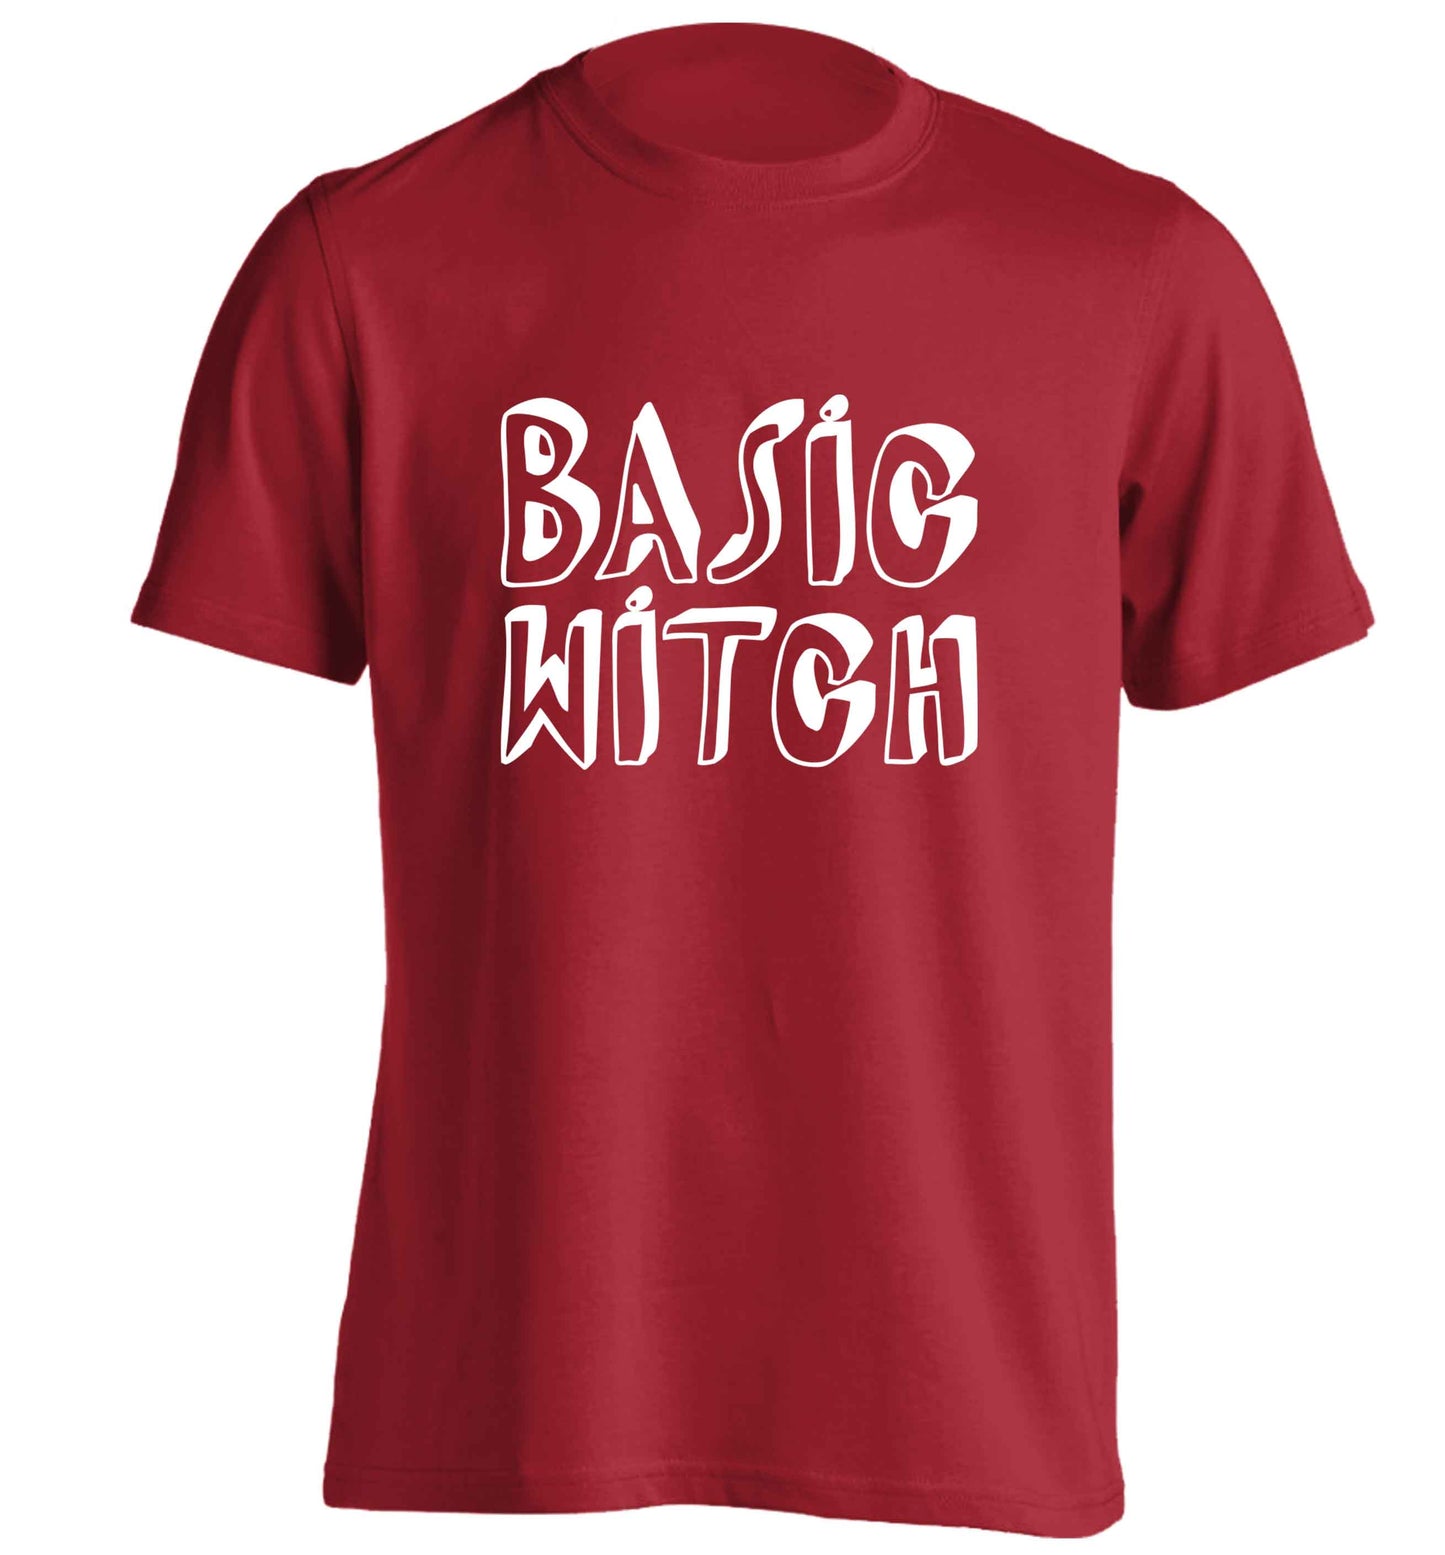 Basic witch adults unisex red Tshirt 2XL